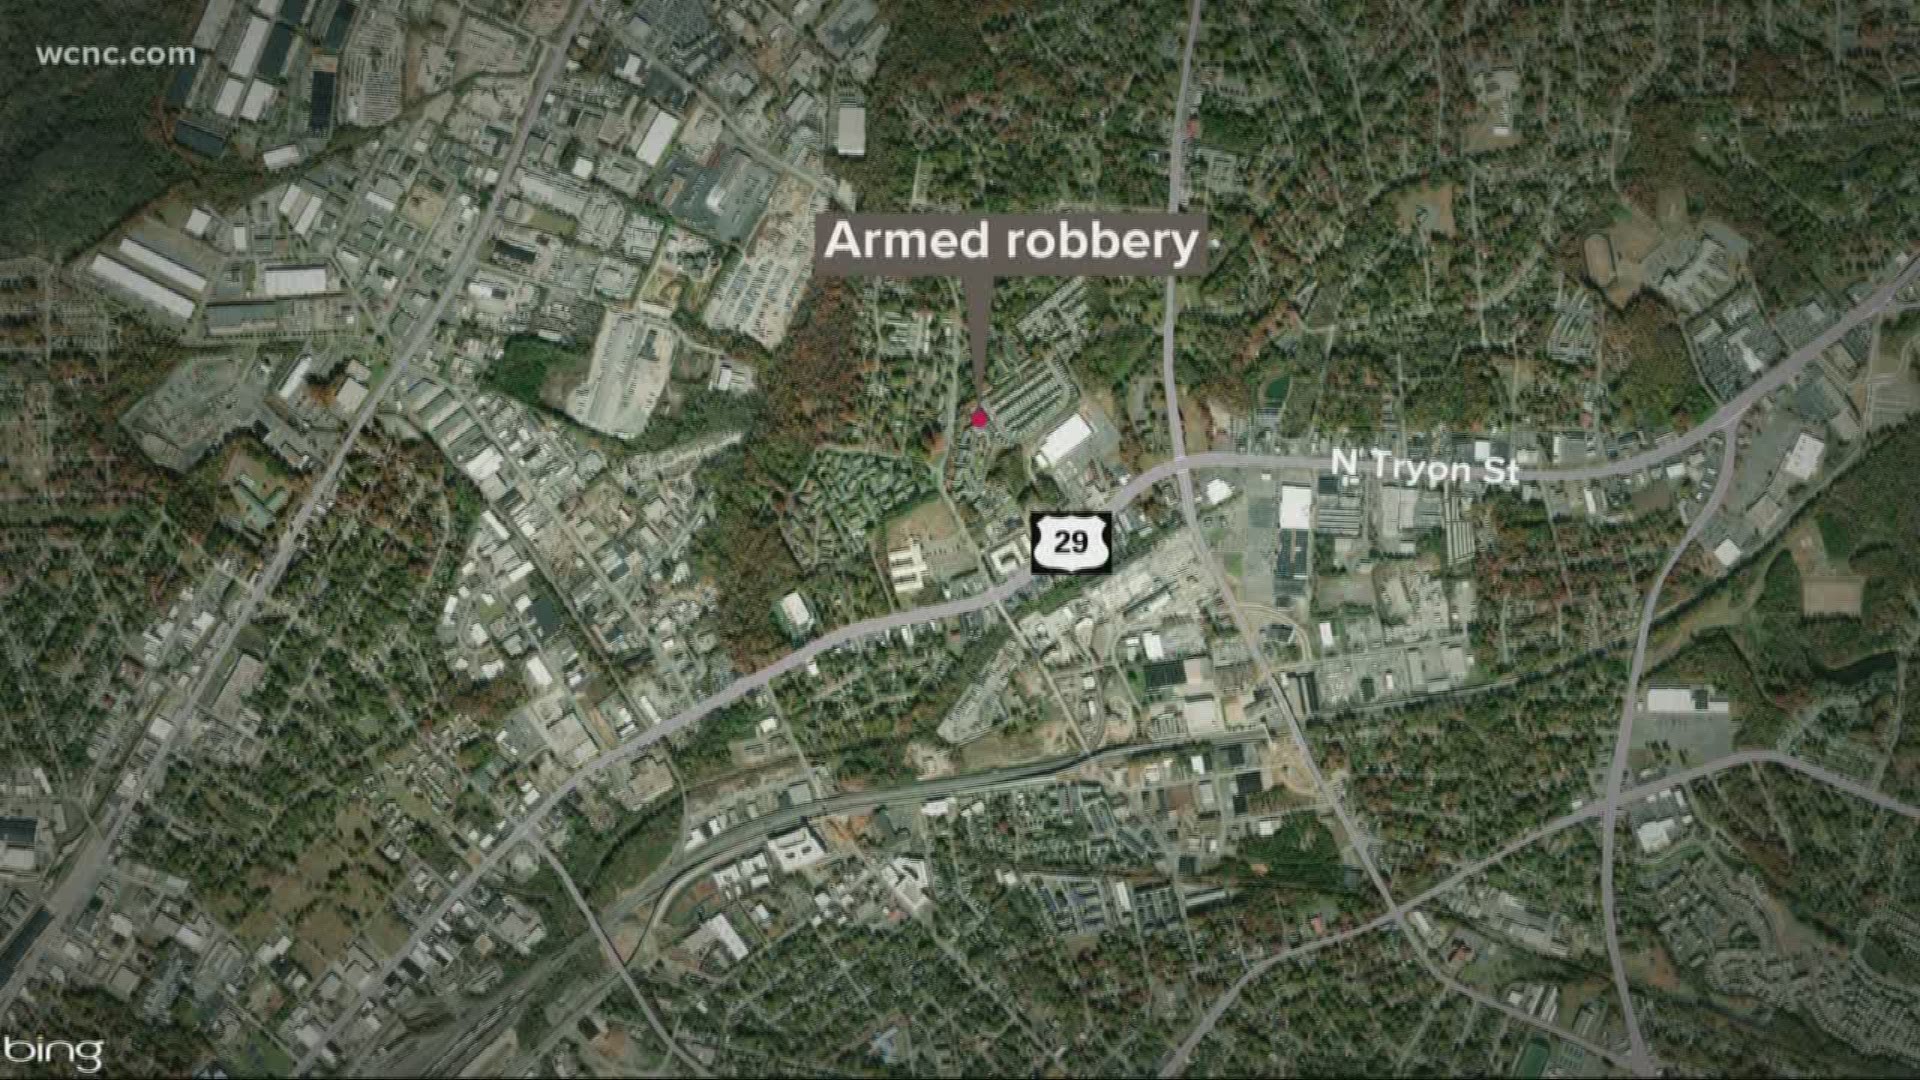 Police said a man was carjacked at an apartment complex by two suspects in north Charlotte.